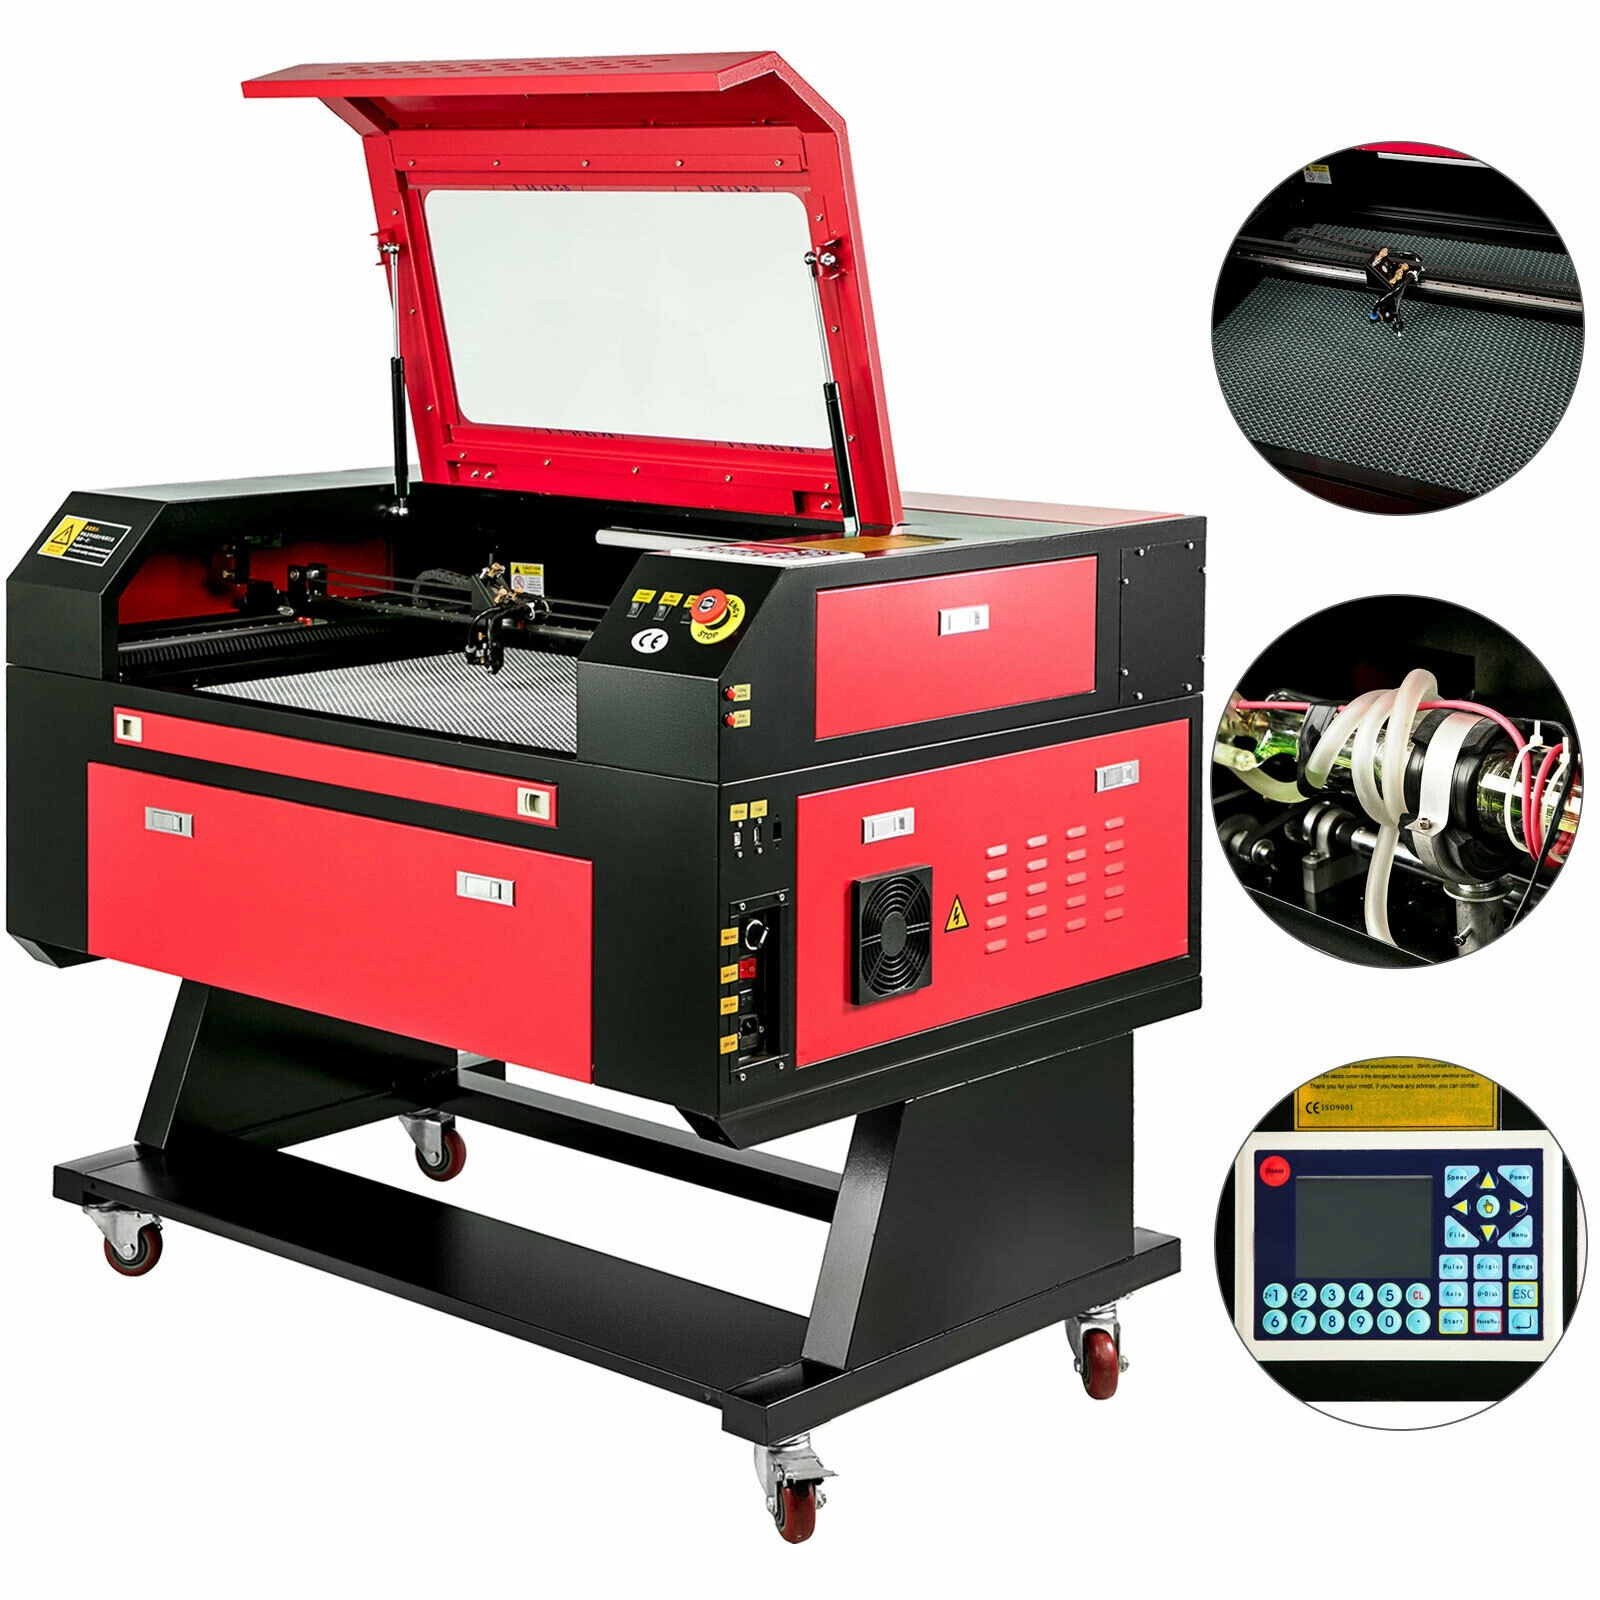 VEVOR Laser Engraver 80W CO2 Laser Engraving Machine 28X20 Inch Laser Cutting Machine with DSP Control System and USB Interface with CNC Router Rotary Axis 80mm 